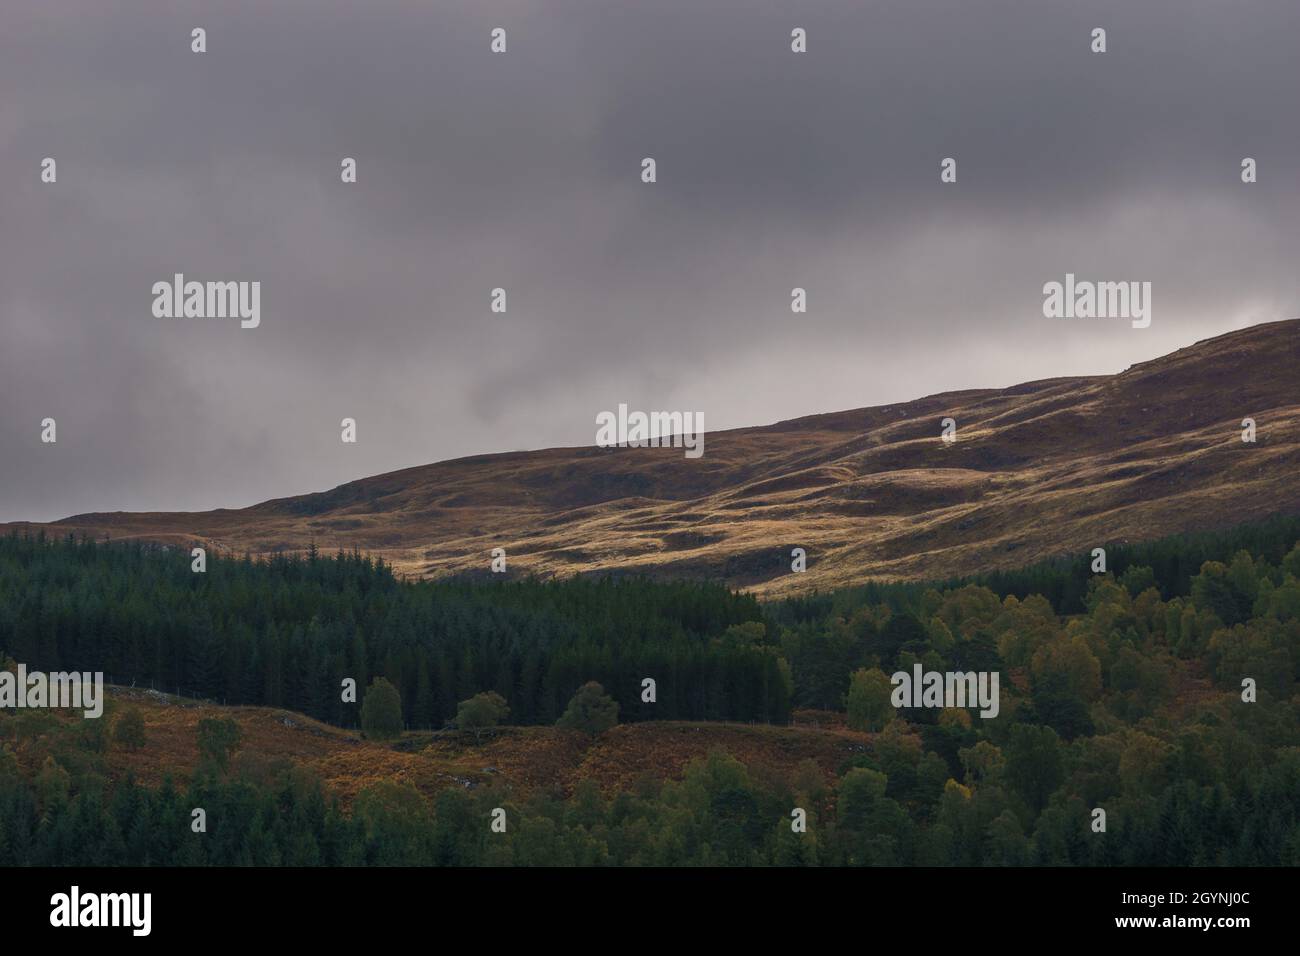 Detail of scottish landscape with forest on hill side in autumn under a cloudy sky, Scotland Stock Photo